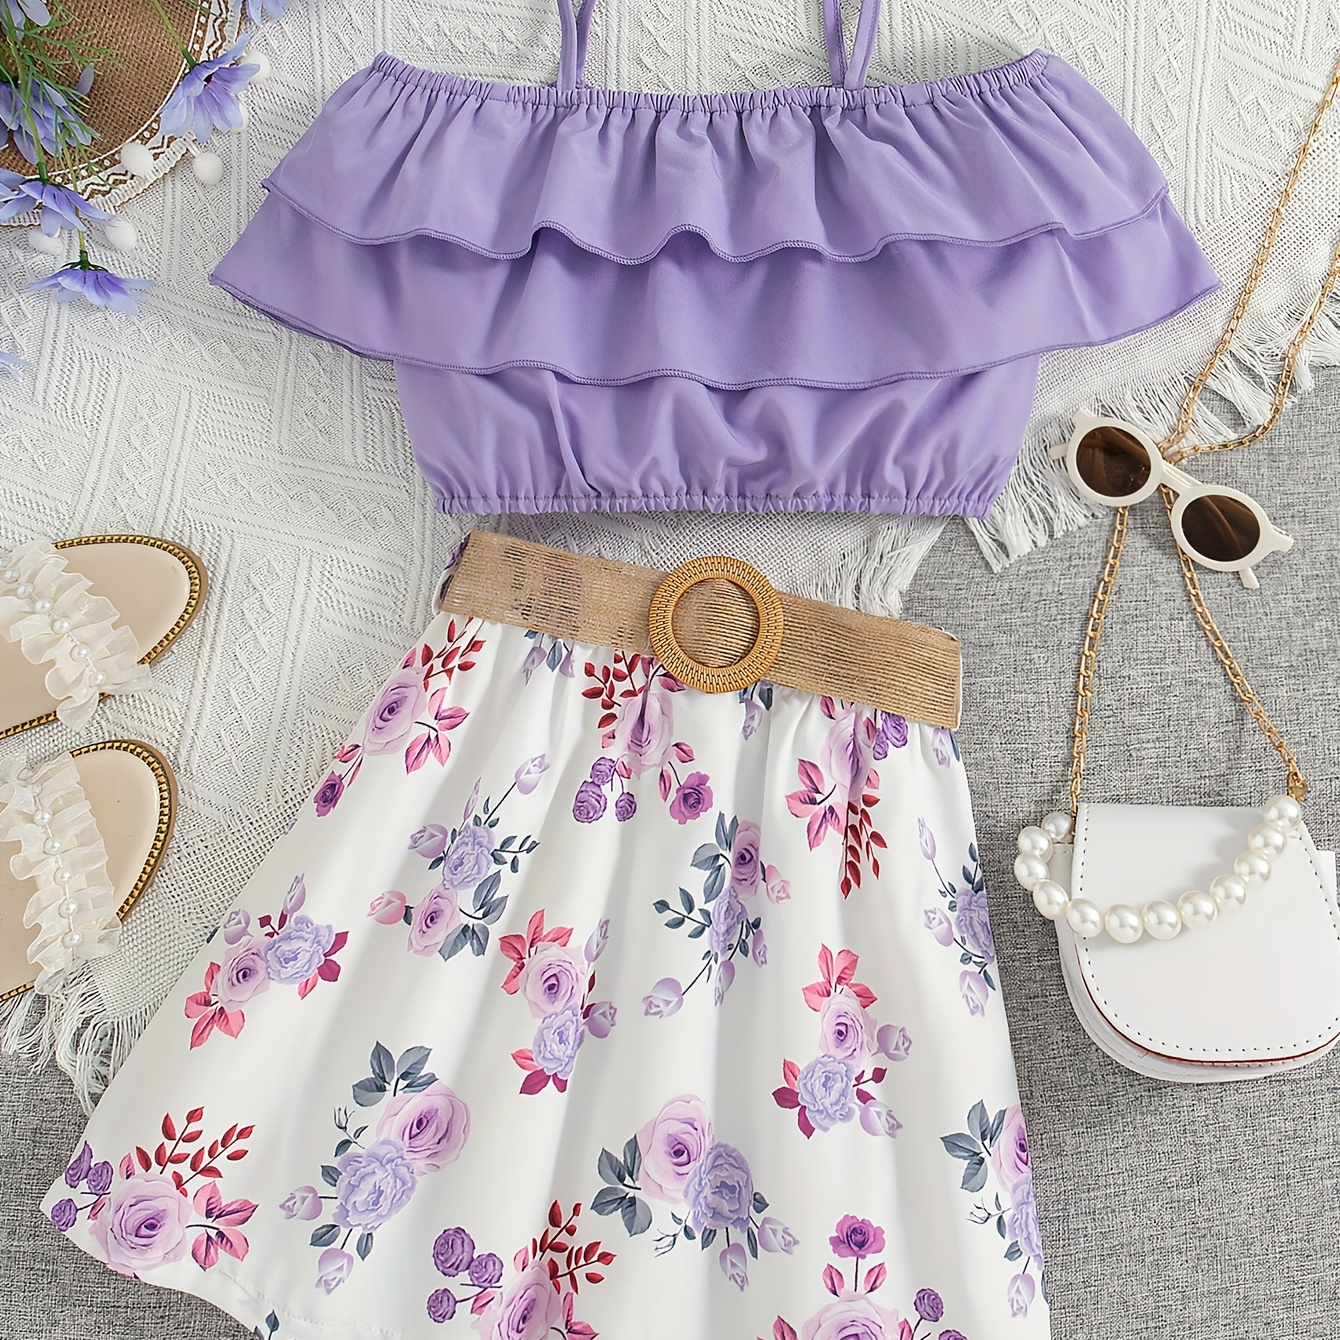 

Girl's Classy Outfit Ruffle Off-shoulder Cami Top + Floral Short Skirt Holiday Casual Set With Belt, Summer 2pcs Girls Clothes